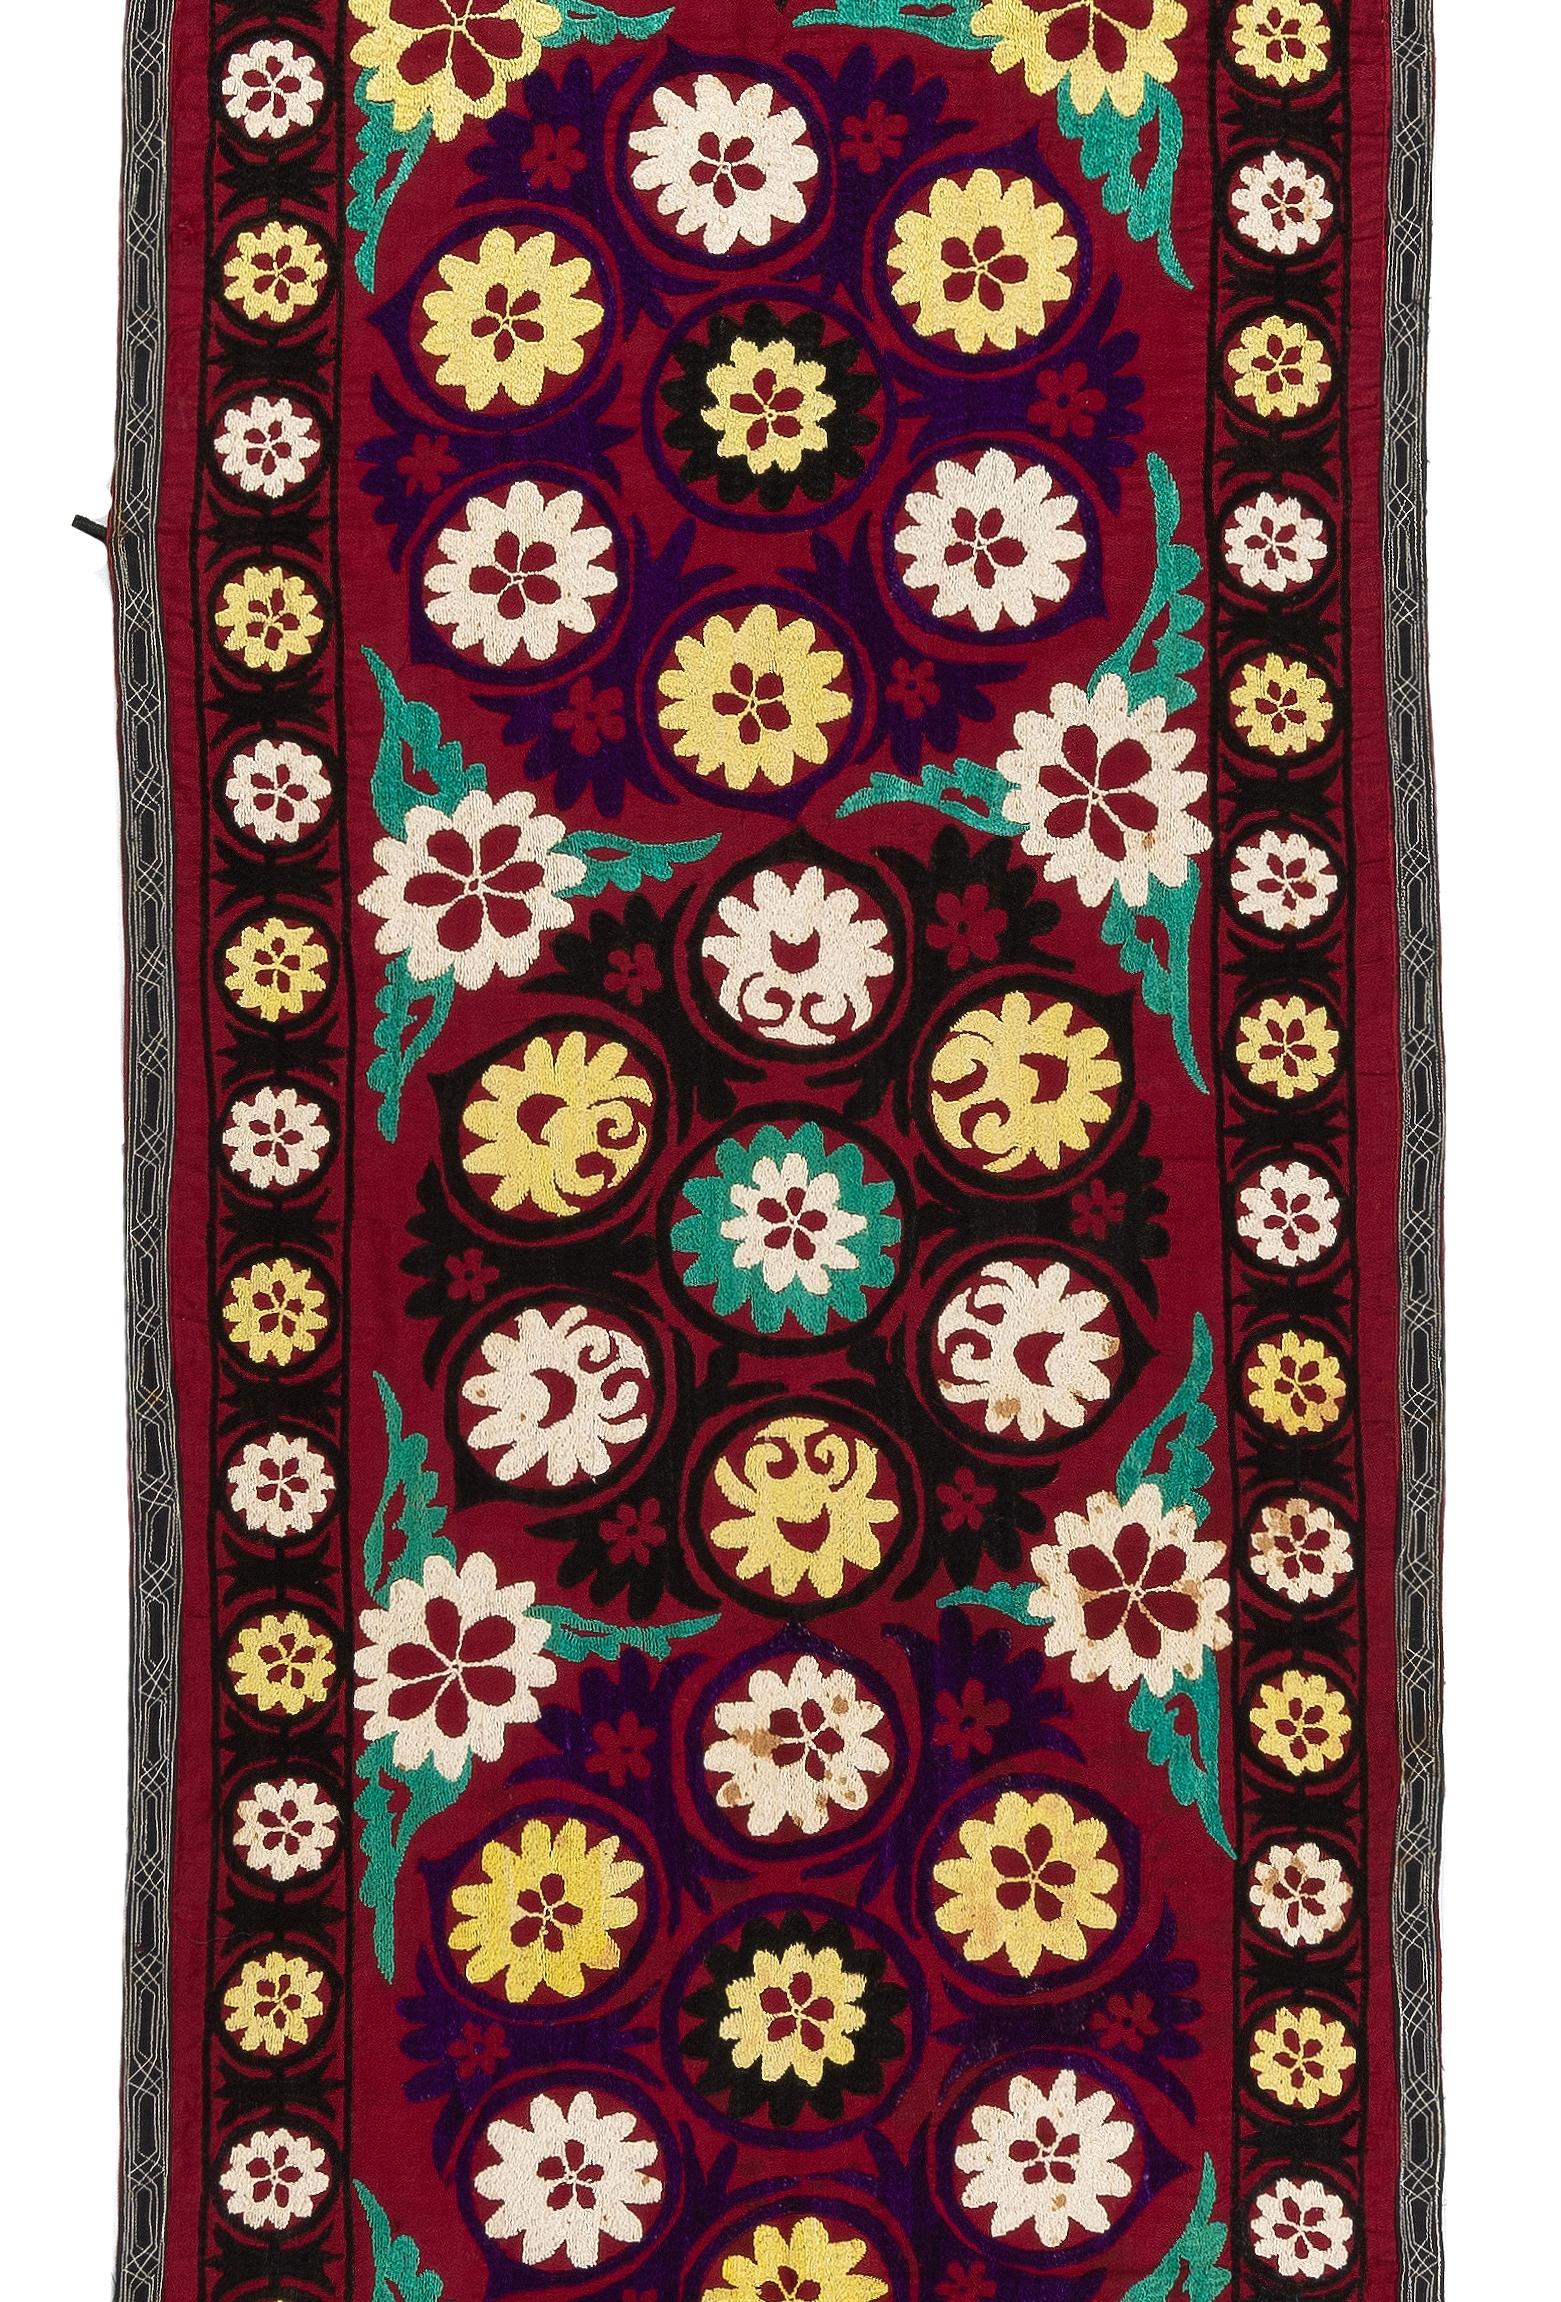 Uzbek 2x14 Ft Silk Embroidery Table Runner, Vintage Floral Pattern Suzani Wall Hanging For Sale